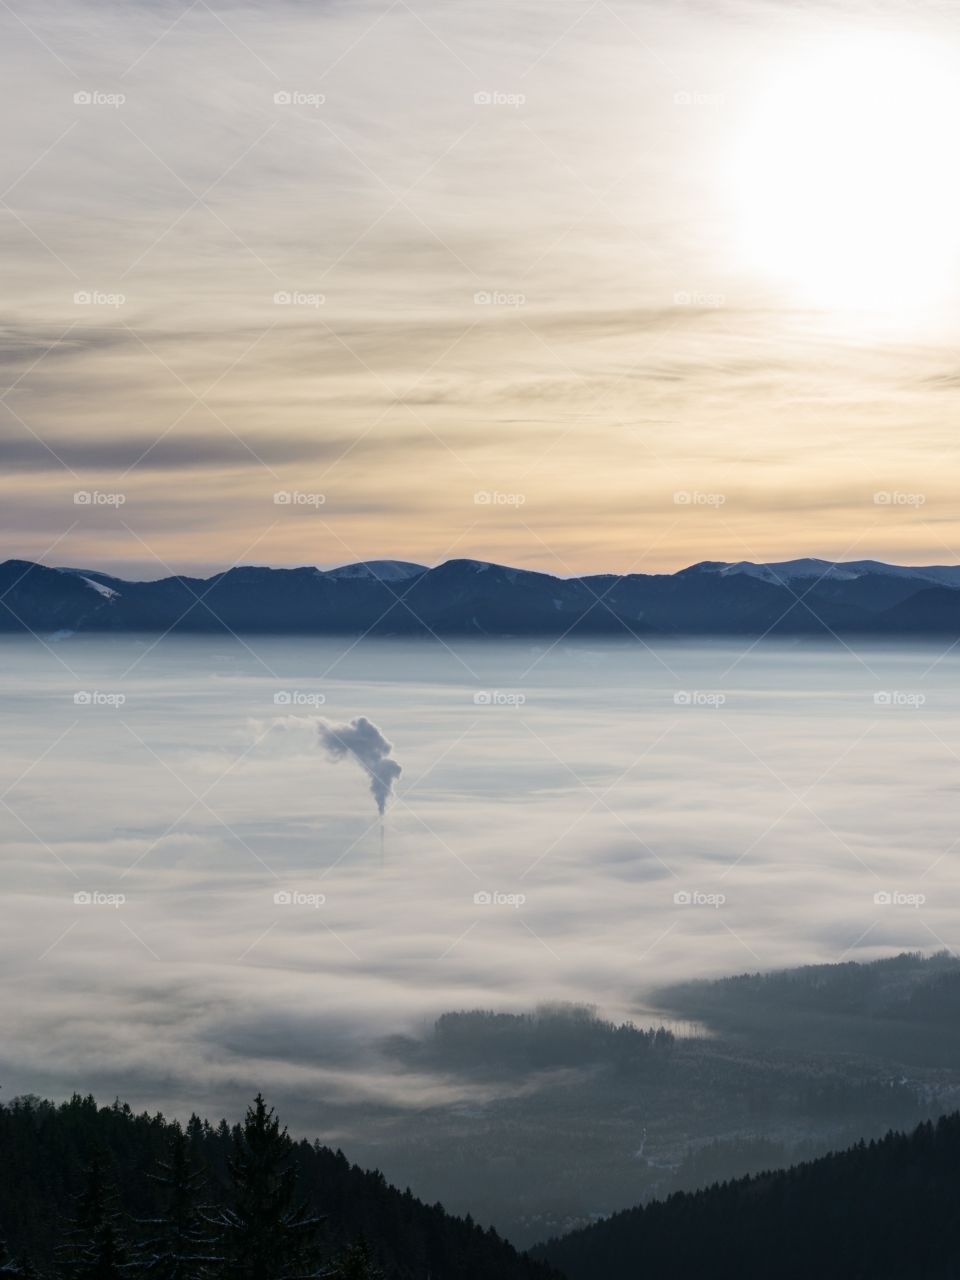 Sunrise, Chimney under the inversion, clouds and mountains